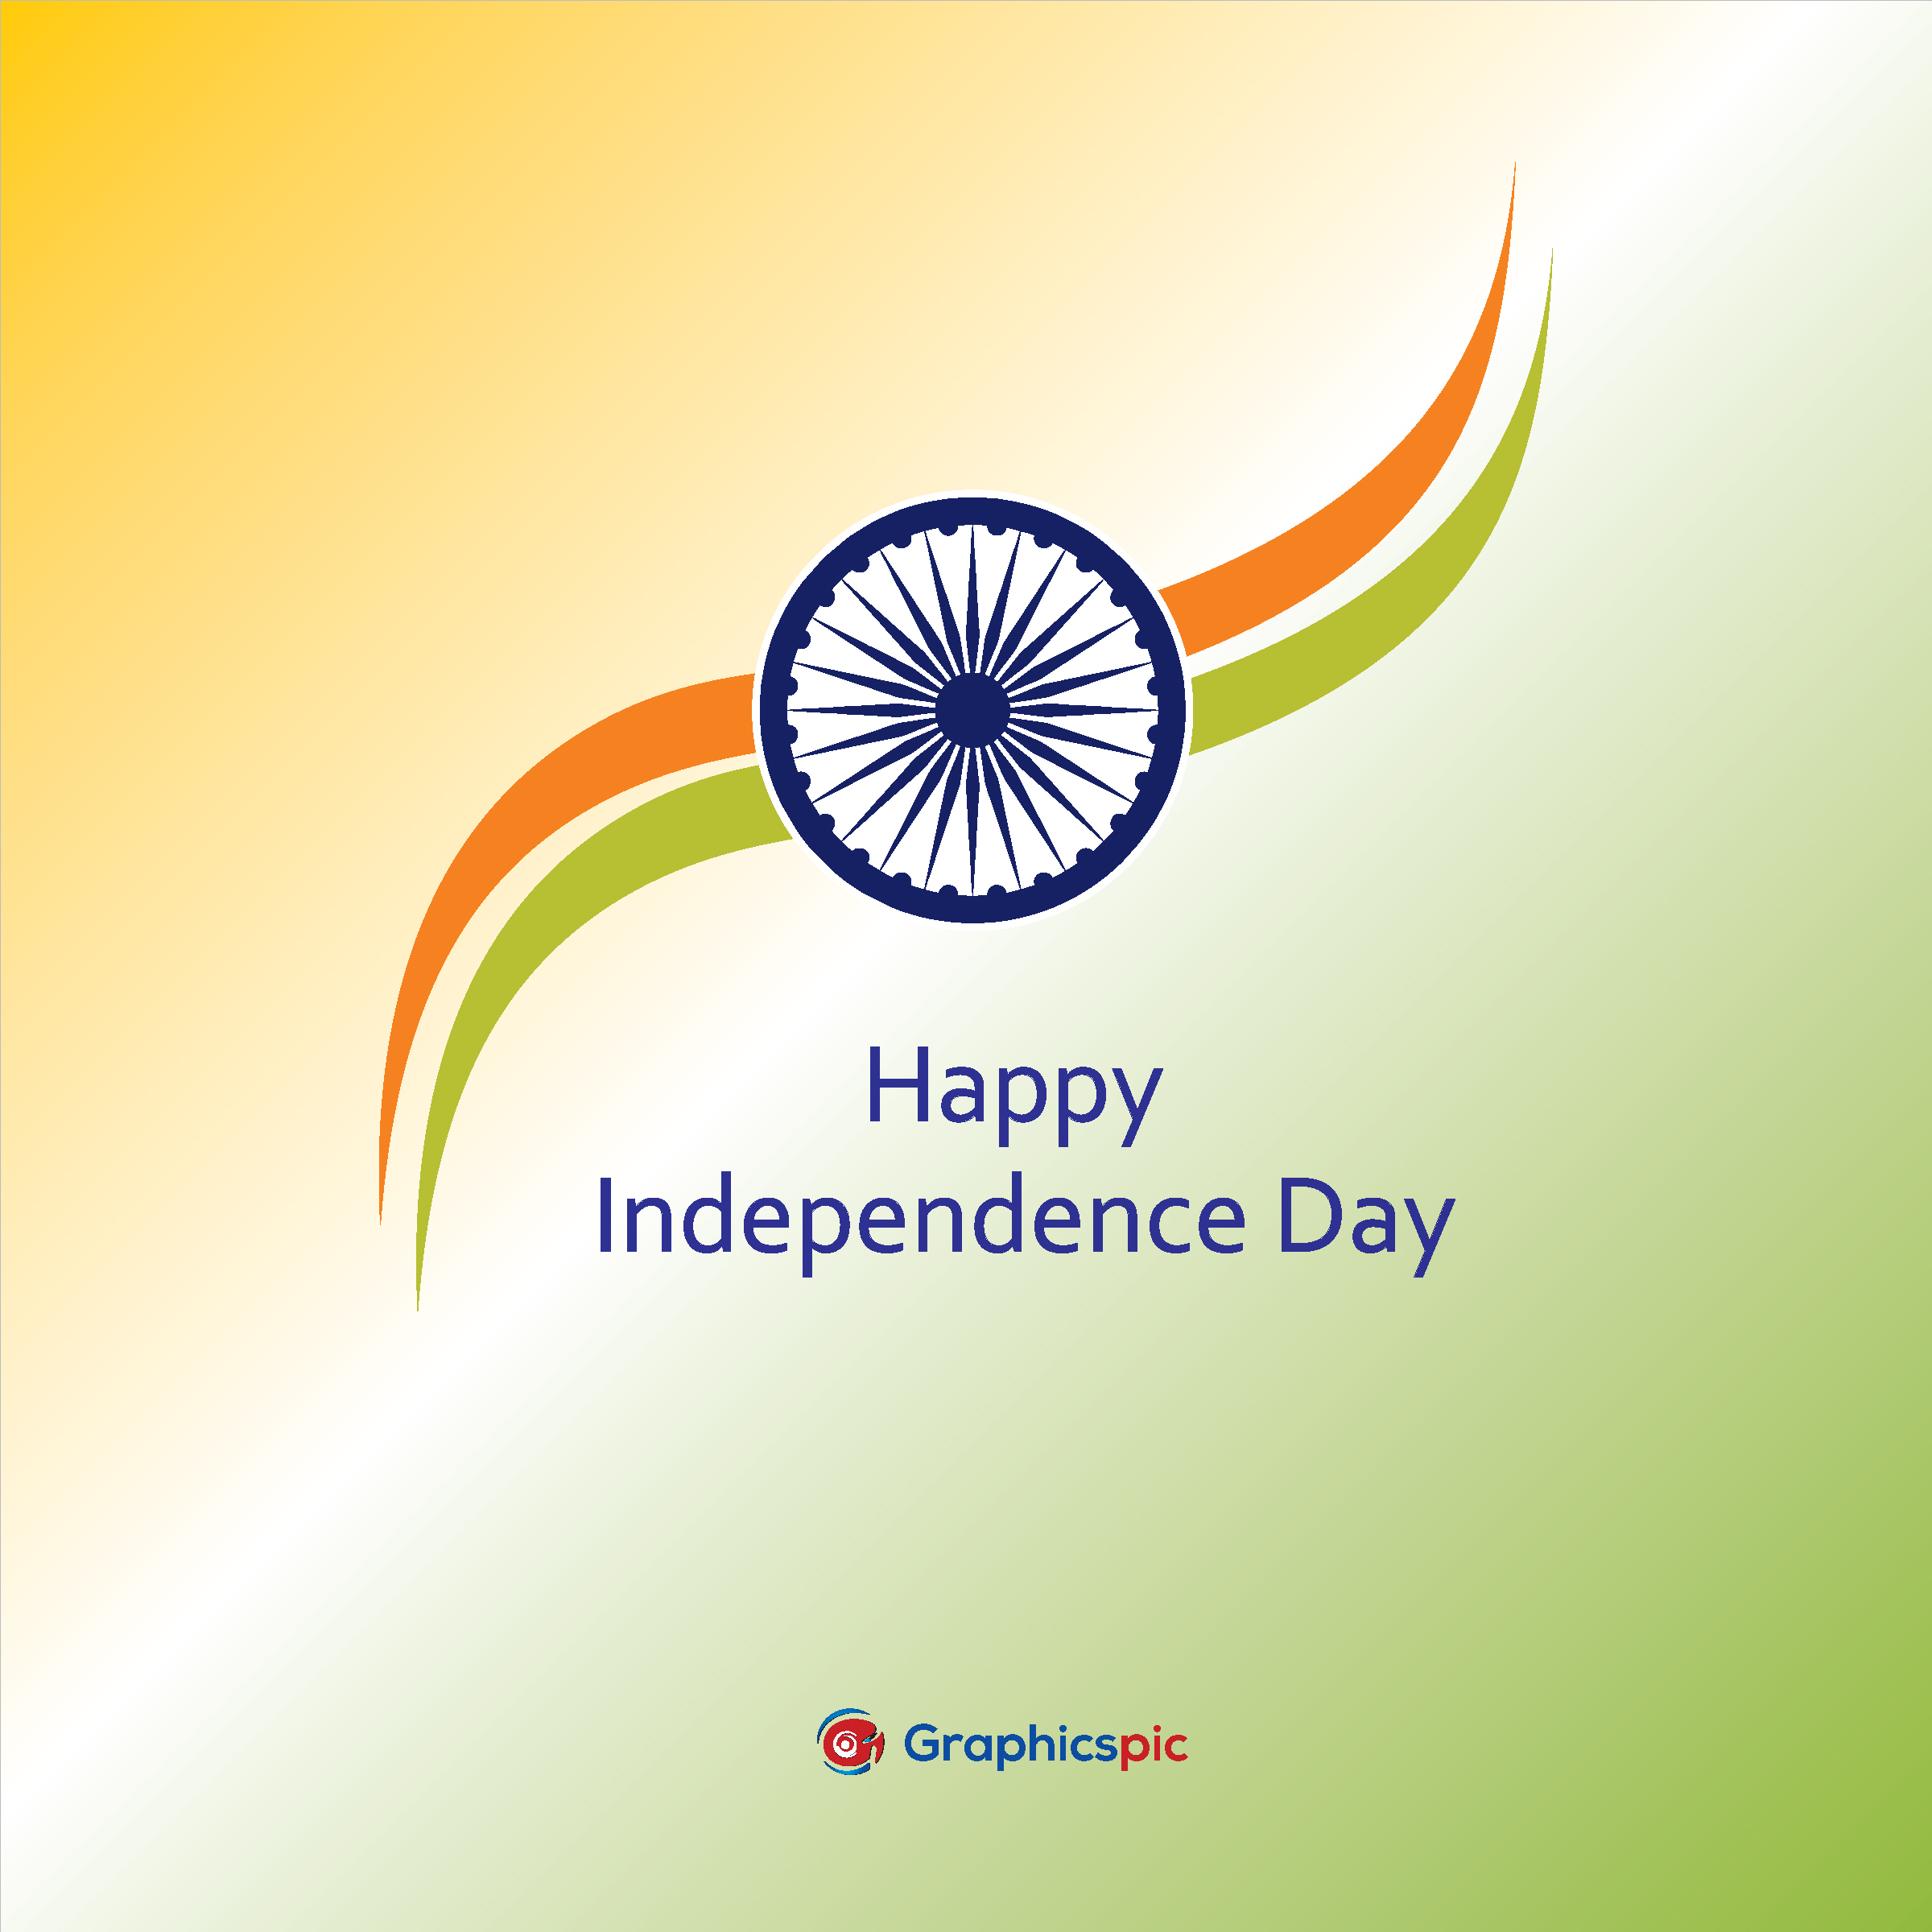 Happy independence day india 15th august Vector Image